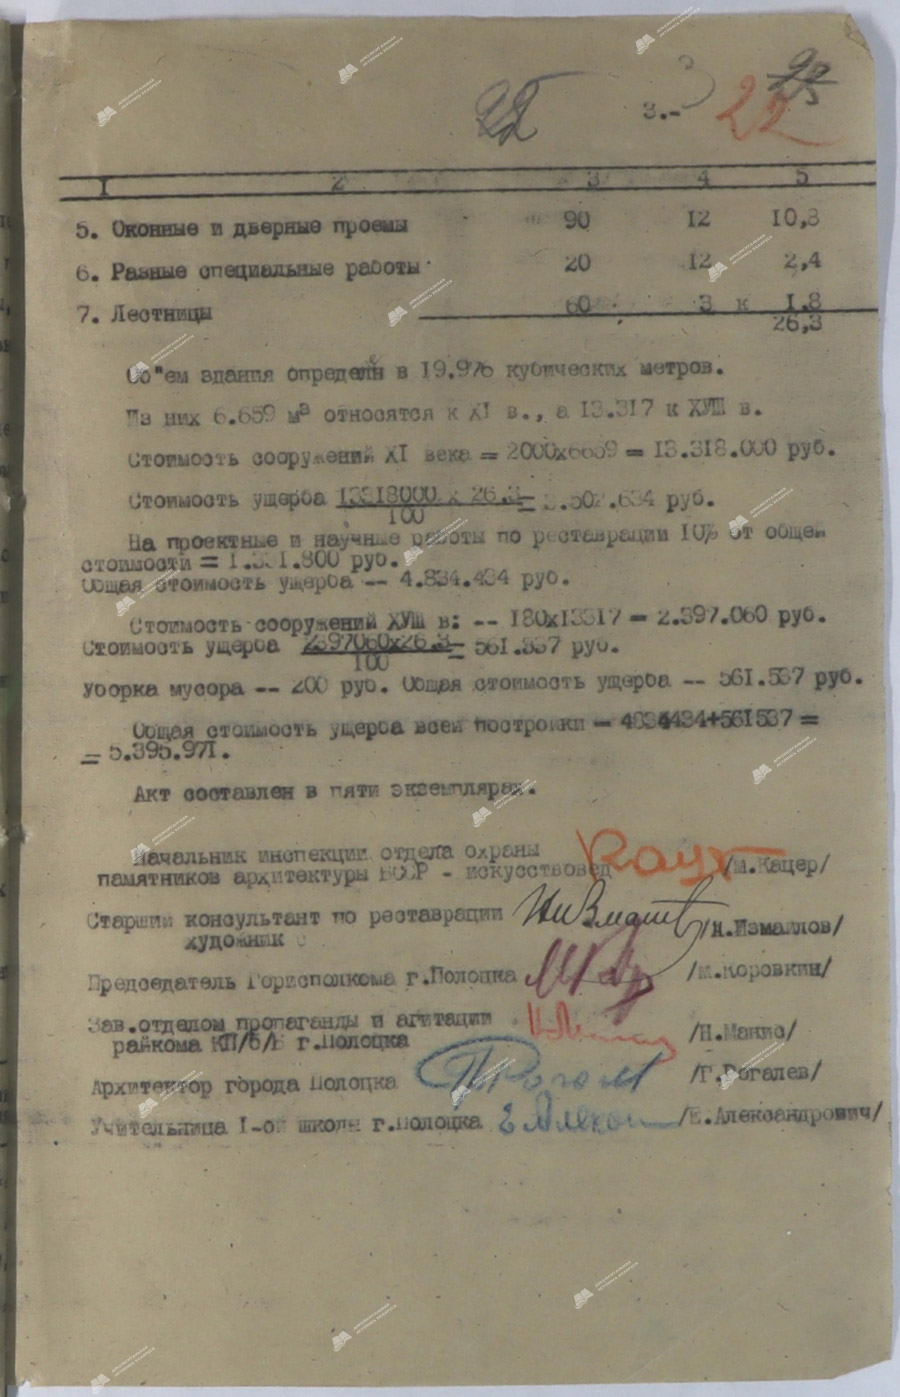 Acts of the commission of the Polotsk City Executive Committee to establish the damage caused by the Nazi invaders to the architectural monuments of Polotsk-стр. 4